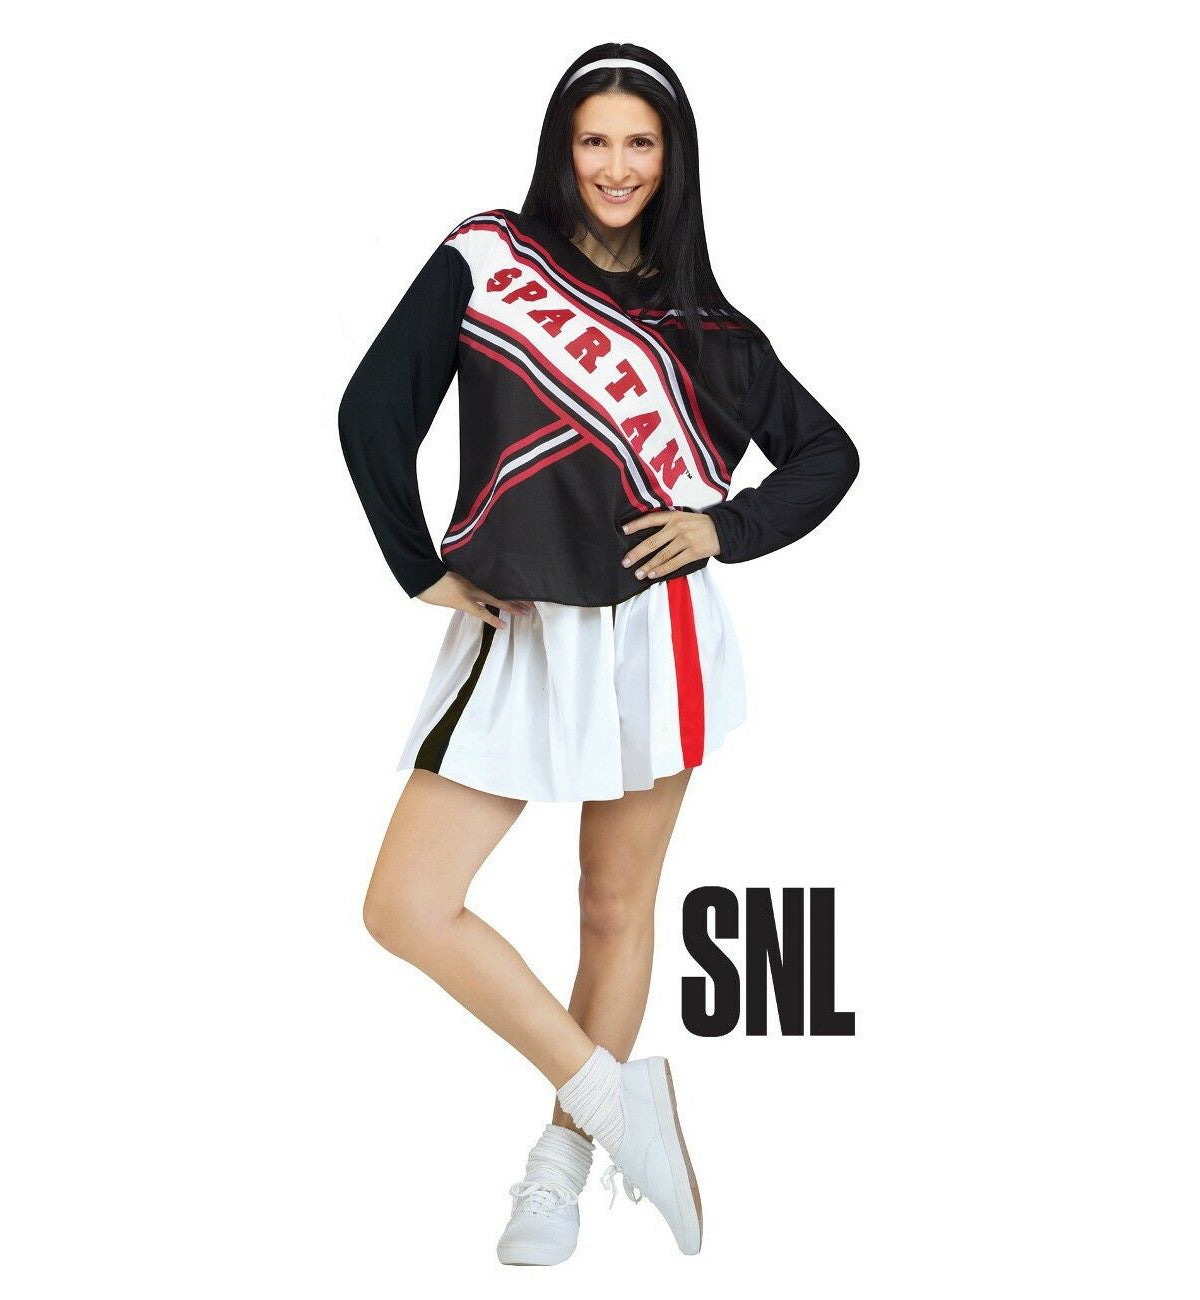 Spartan Cheerleader SNL Saturday Night Live Adult Women Costume Top with imprinted logo Pleated skirt